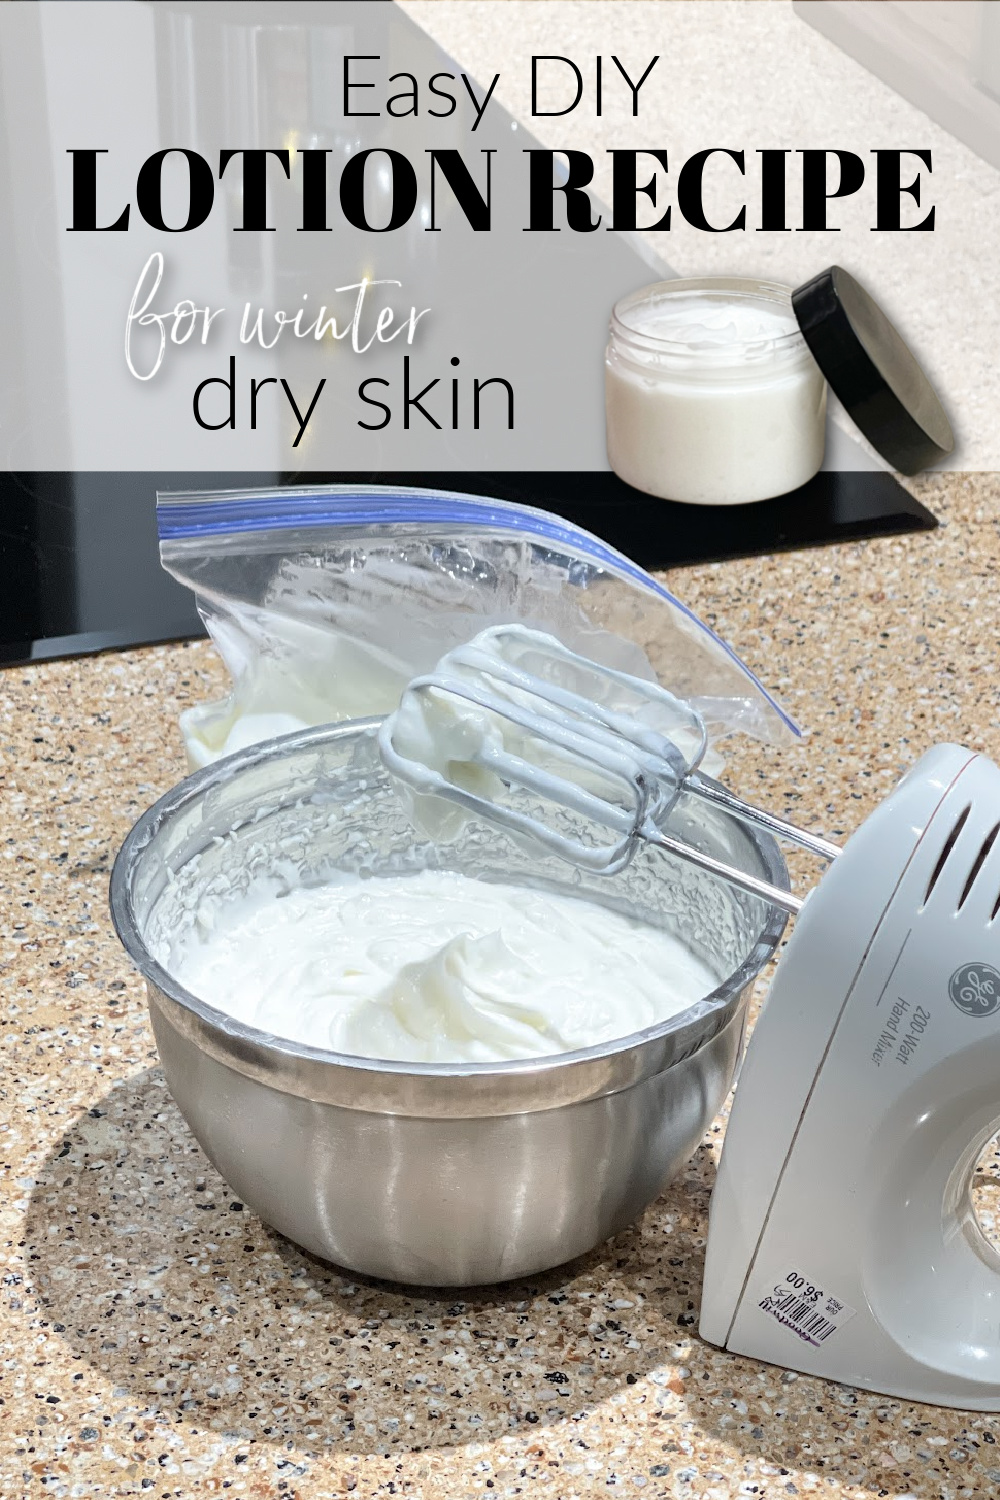 The BEST Body Lotion Recipe For Winter Skin